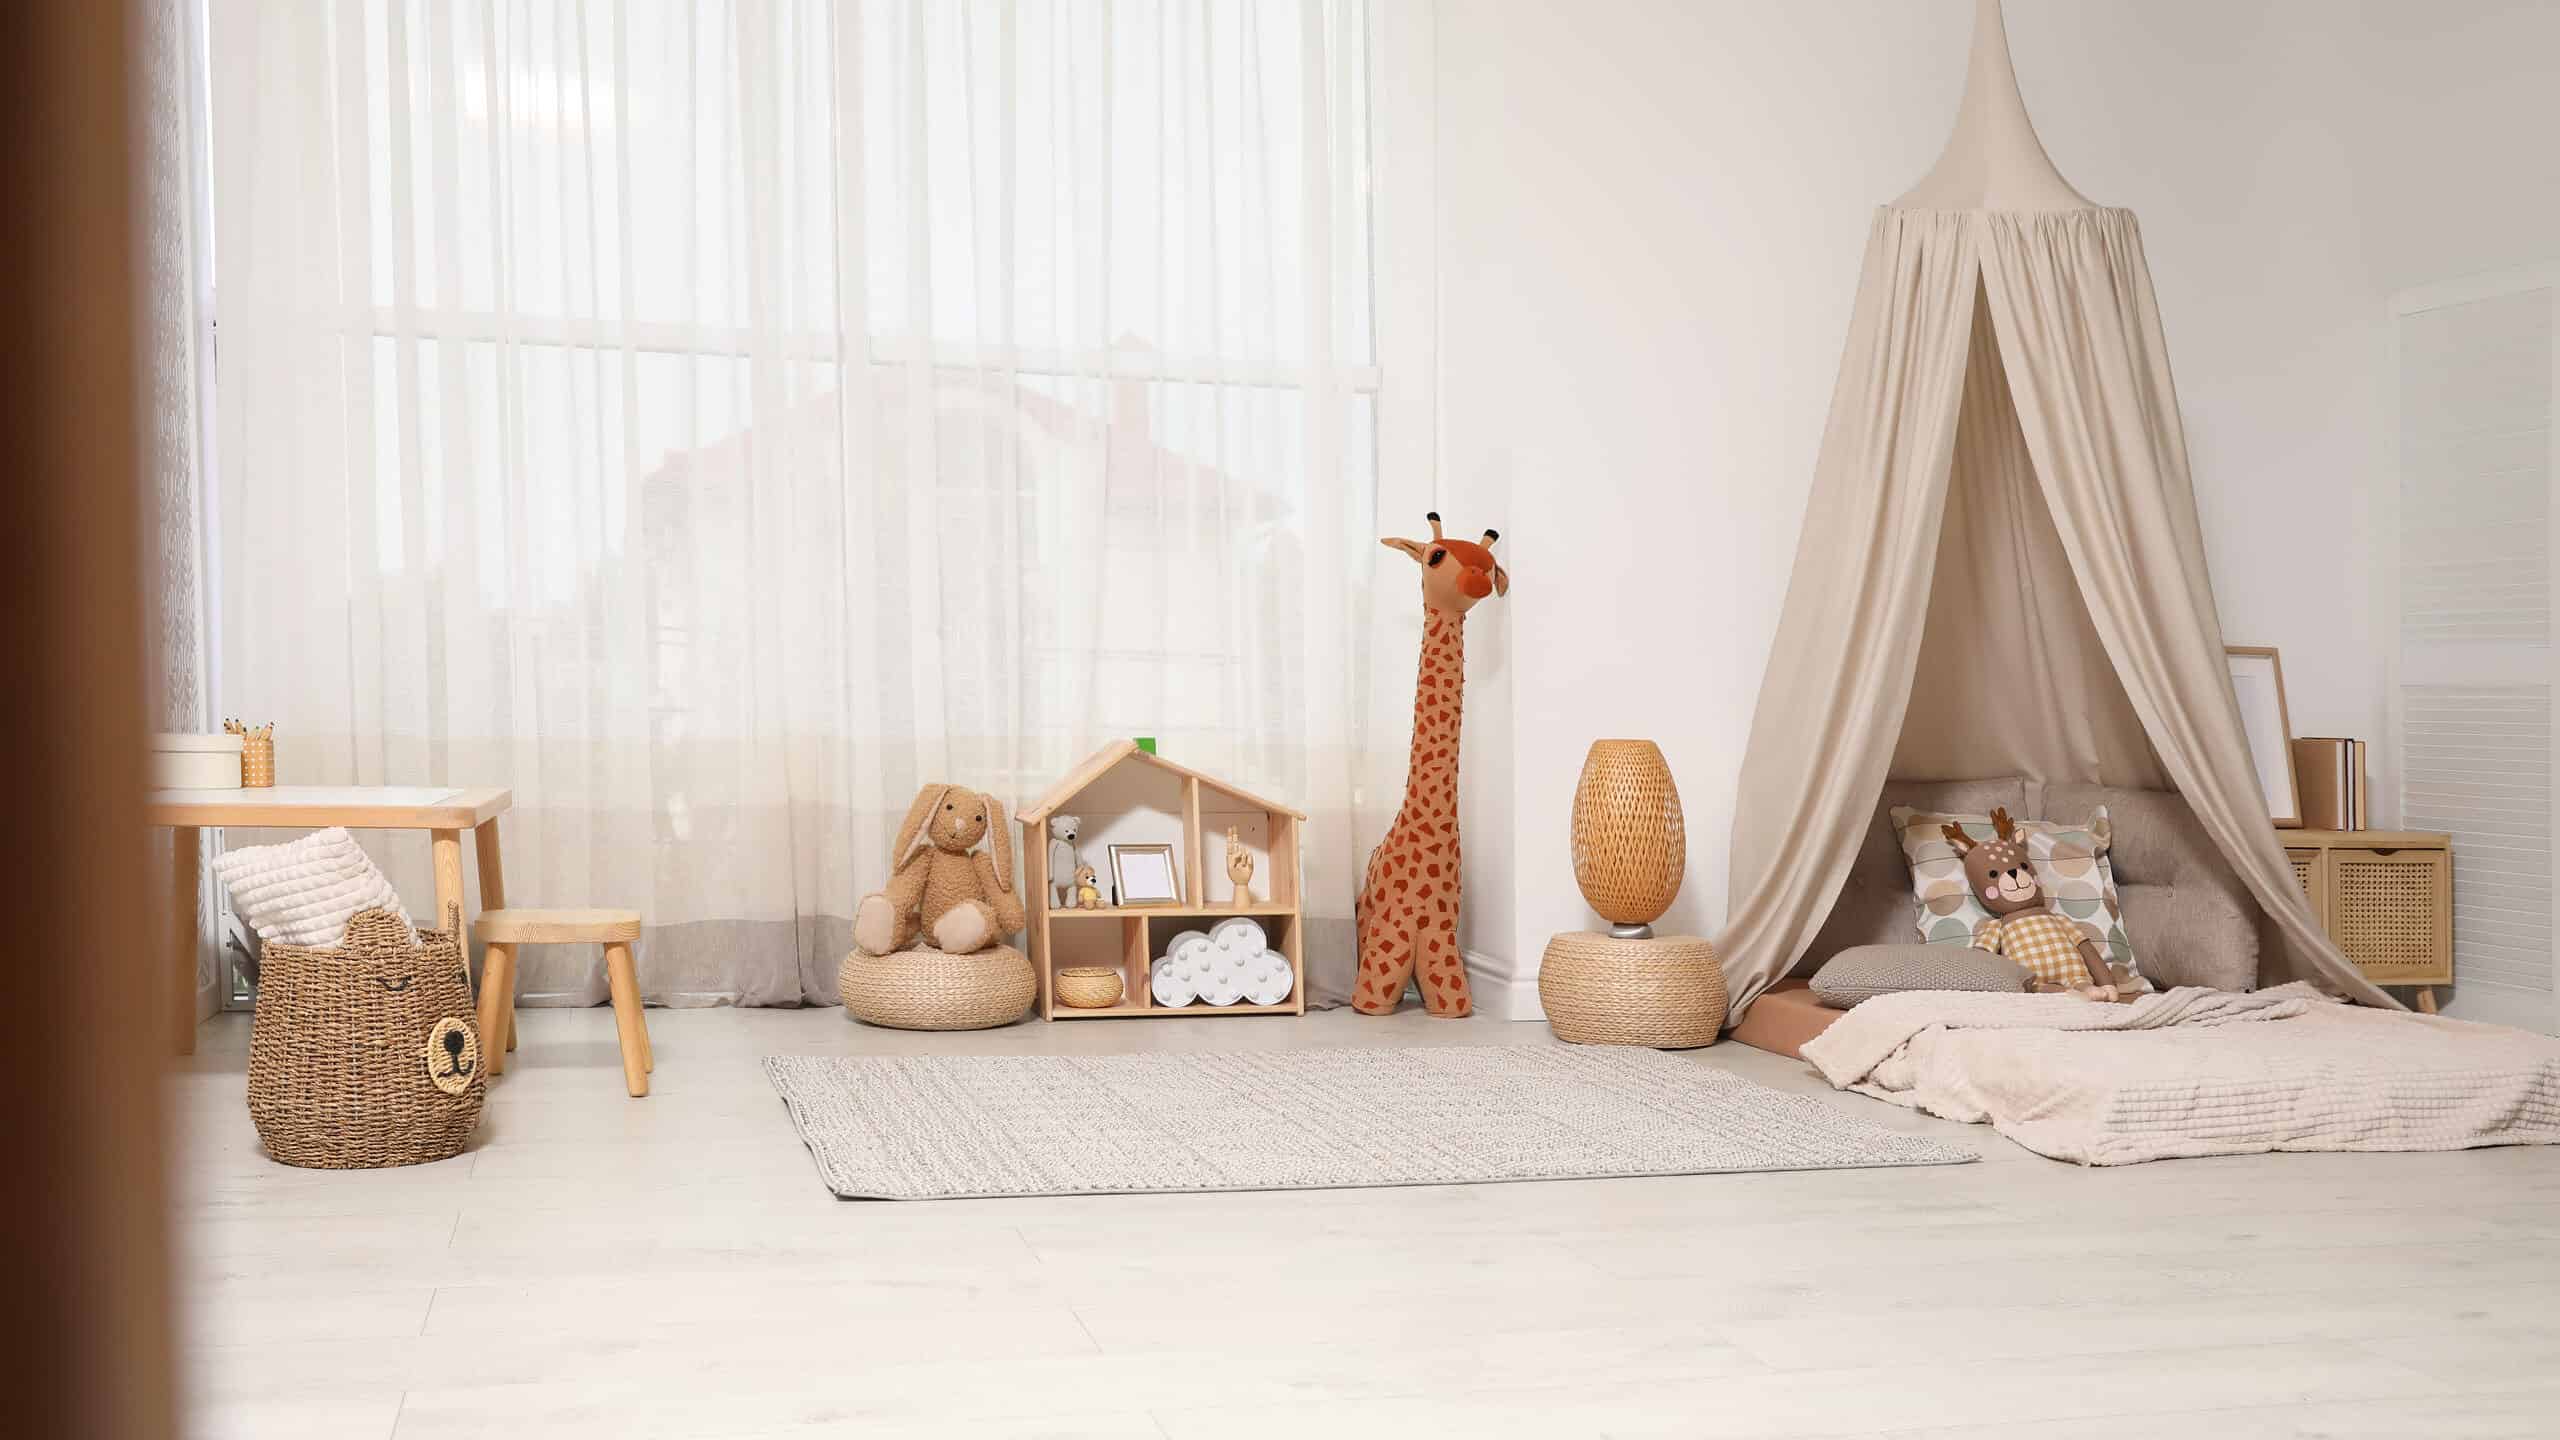 Full frame photograph of a child’s bedroom. Everything in the bedroom has very muted tones from the light gray floor to the white walls. In the left frame is a wicker basket with additions that make it appear to be a bear. There is a wheat colored blanket there’s a bowl at the top. Behind the wicker basket is a child size table with a stool the table and stool our light would the back left to center of the frame is taken up by a very large window over which is a sheer white curtain. In front of the window is a stuffed rabbit perched on a wicker basket next to the rabbit in the very center of the frame is a small doll house with some indiscernible items in it. Next to the dollhouse is a stuffed giraffe that appears to be about 3 feet tall. The right half of the frame is taken up by a bed on the floor that has a light beige canopy over the head of the bed. The bed itself has three taupe pillows And one pillow that is wheat colored with circles of taupe gold and gray. A stuffed brown rabbit with a gold and checkered body leans against the pillow with the circles. There is a neutral colored blanket over the bed. On the far side of the bed is a wicker stand on which a mirror wrist against the wall and possibly some books.